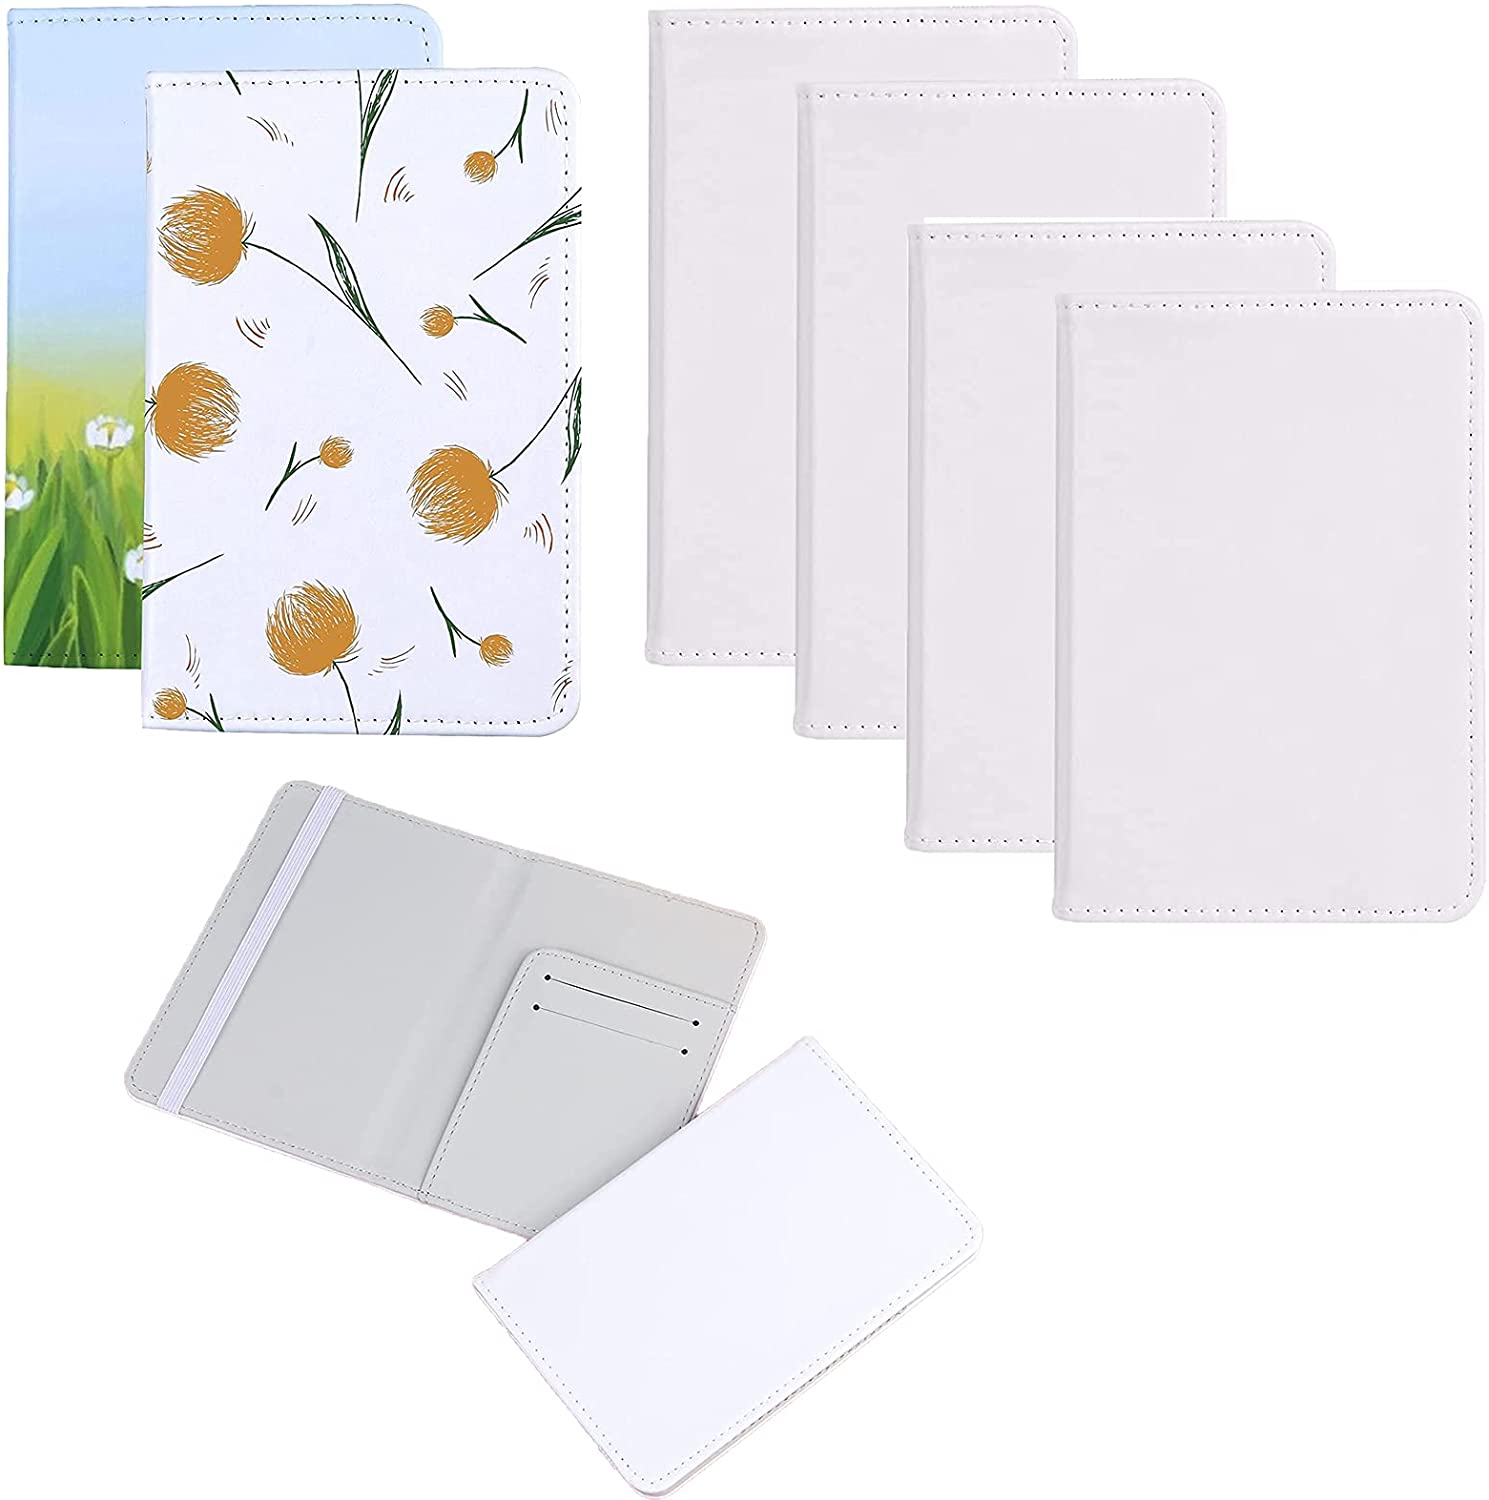 Plastic Cover Blank Diaries & Journals for sale